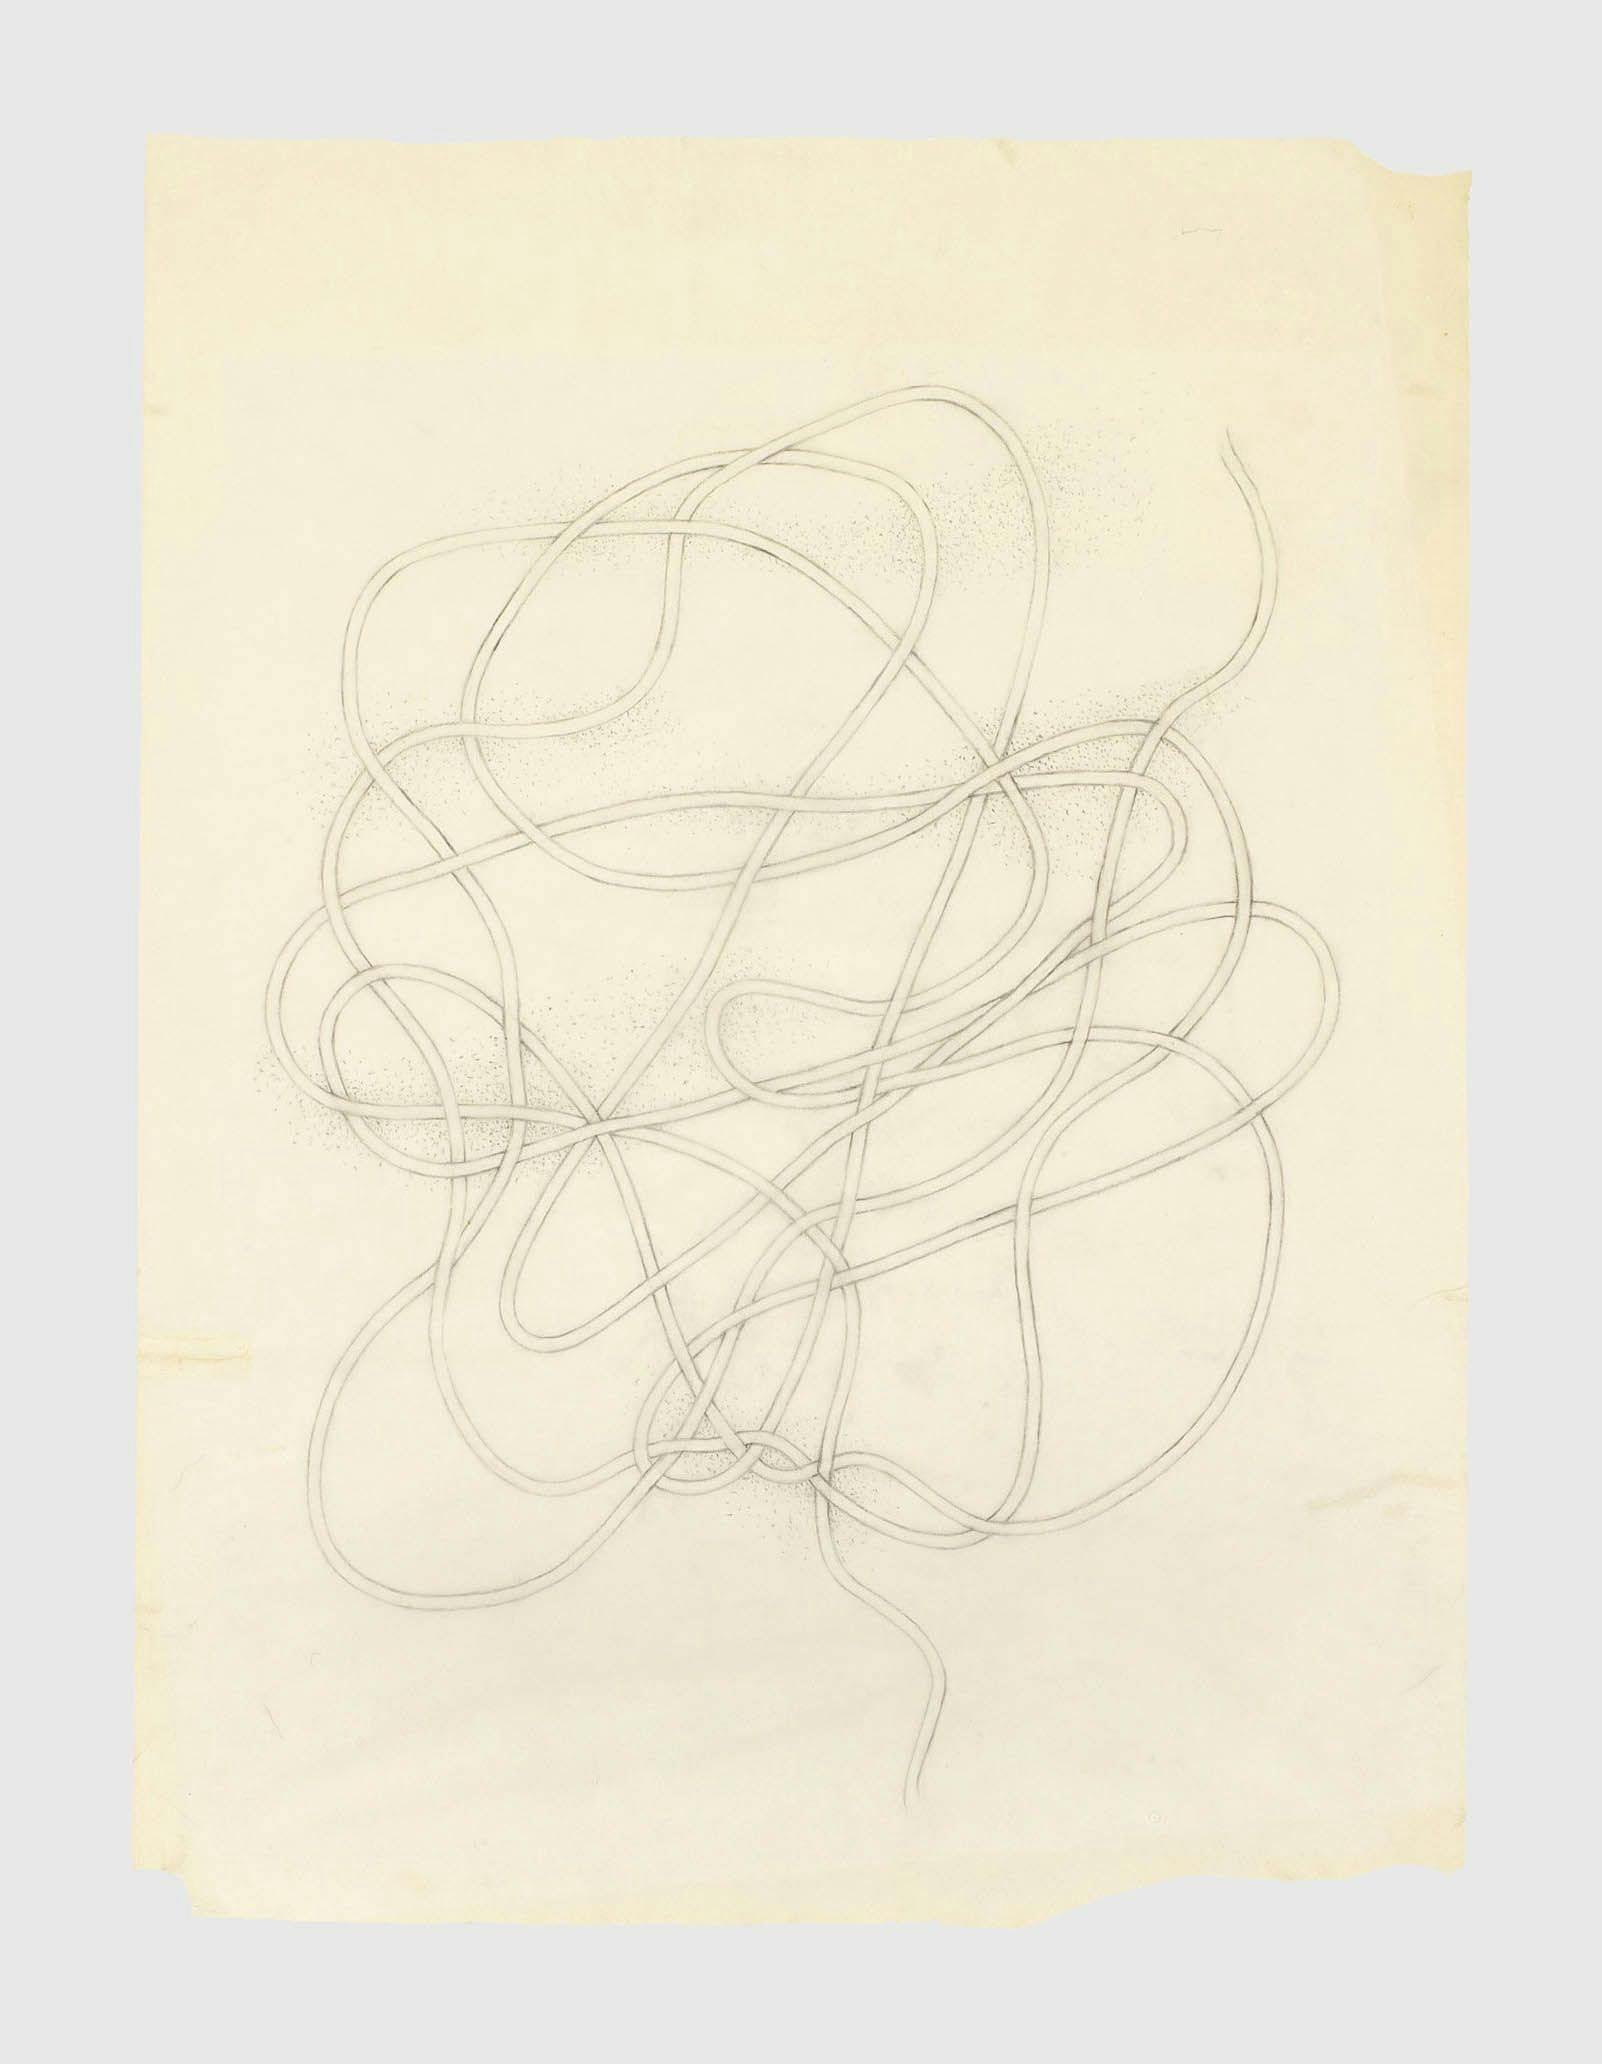 A drawing by Anni Albers, titled Drawing for a knot, dated 1947.